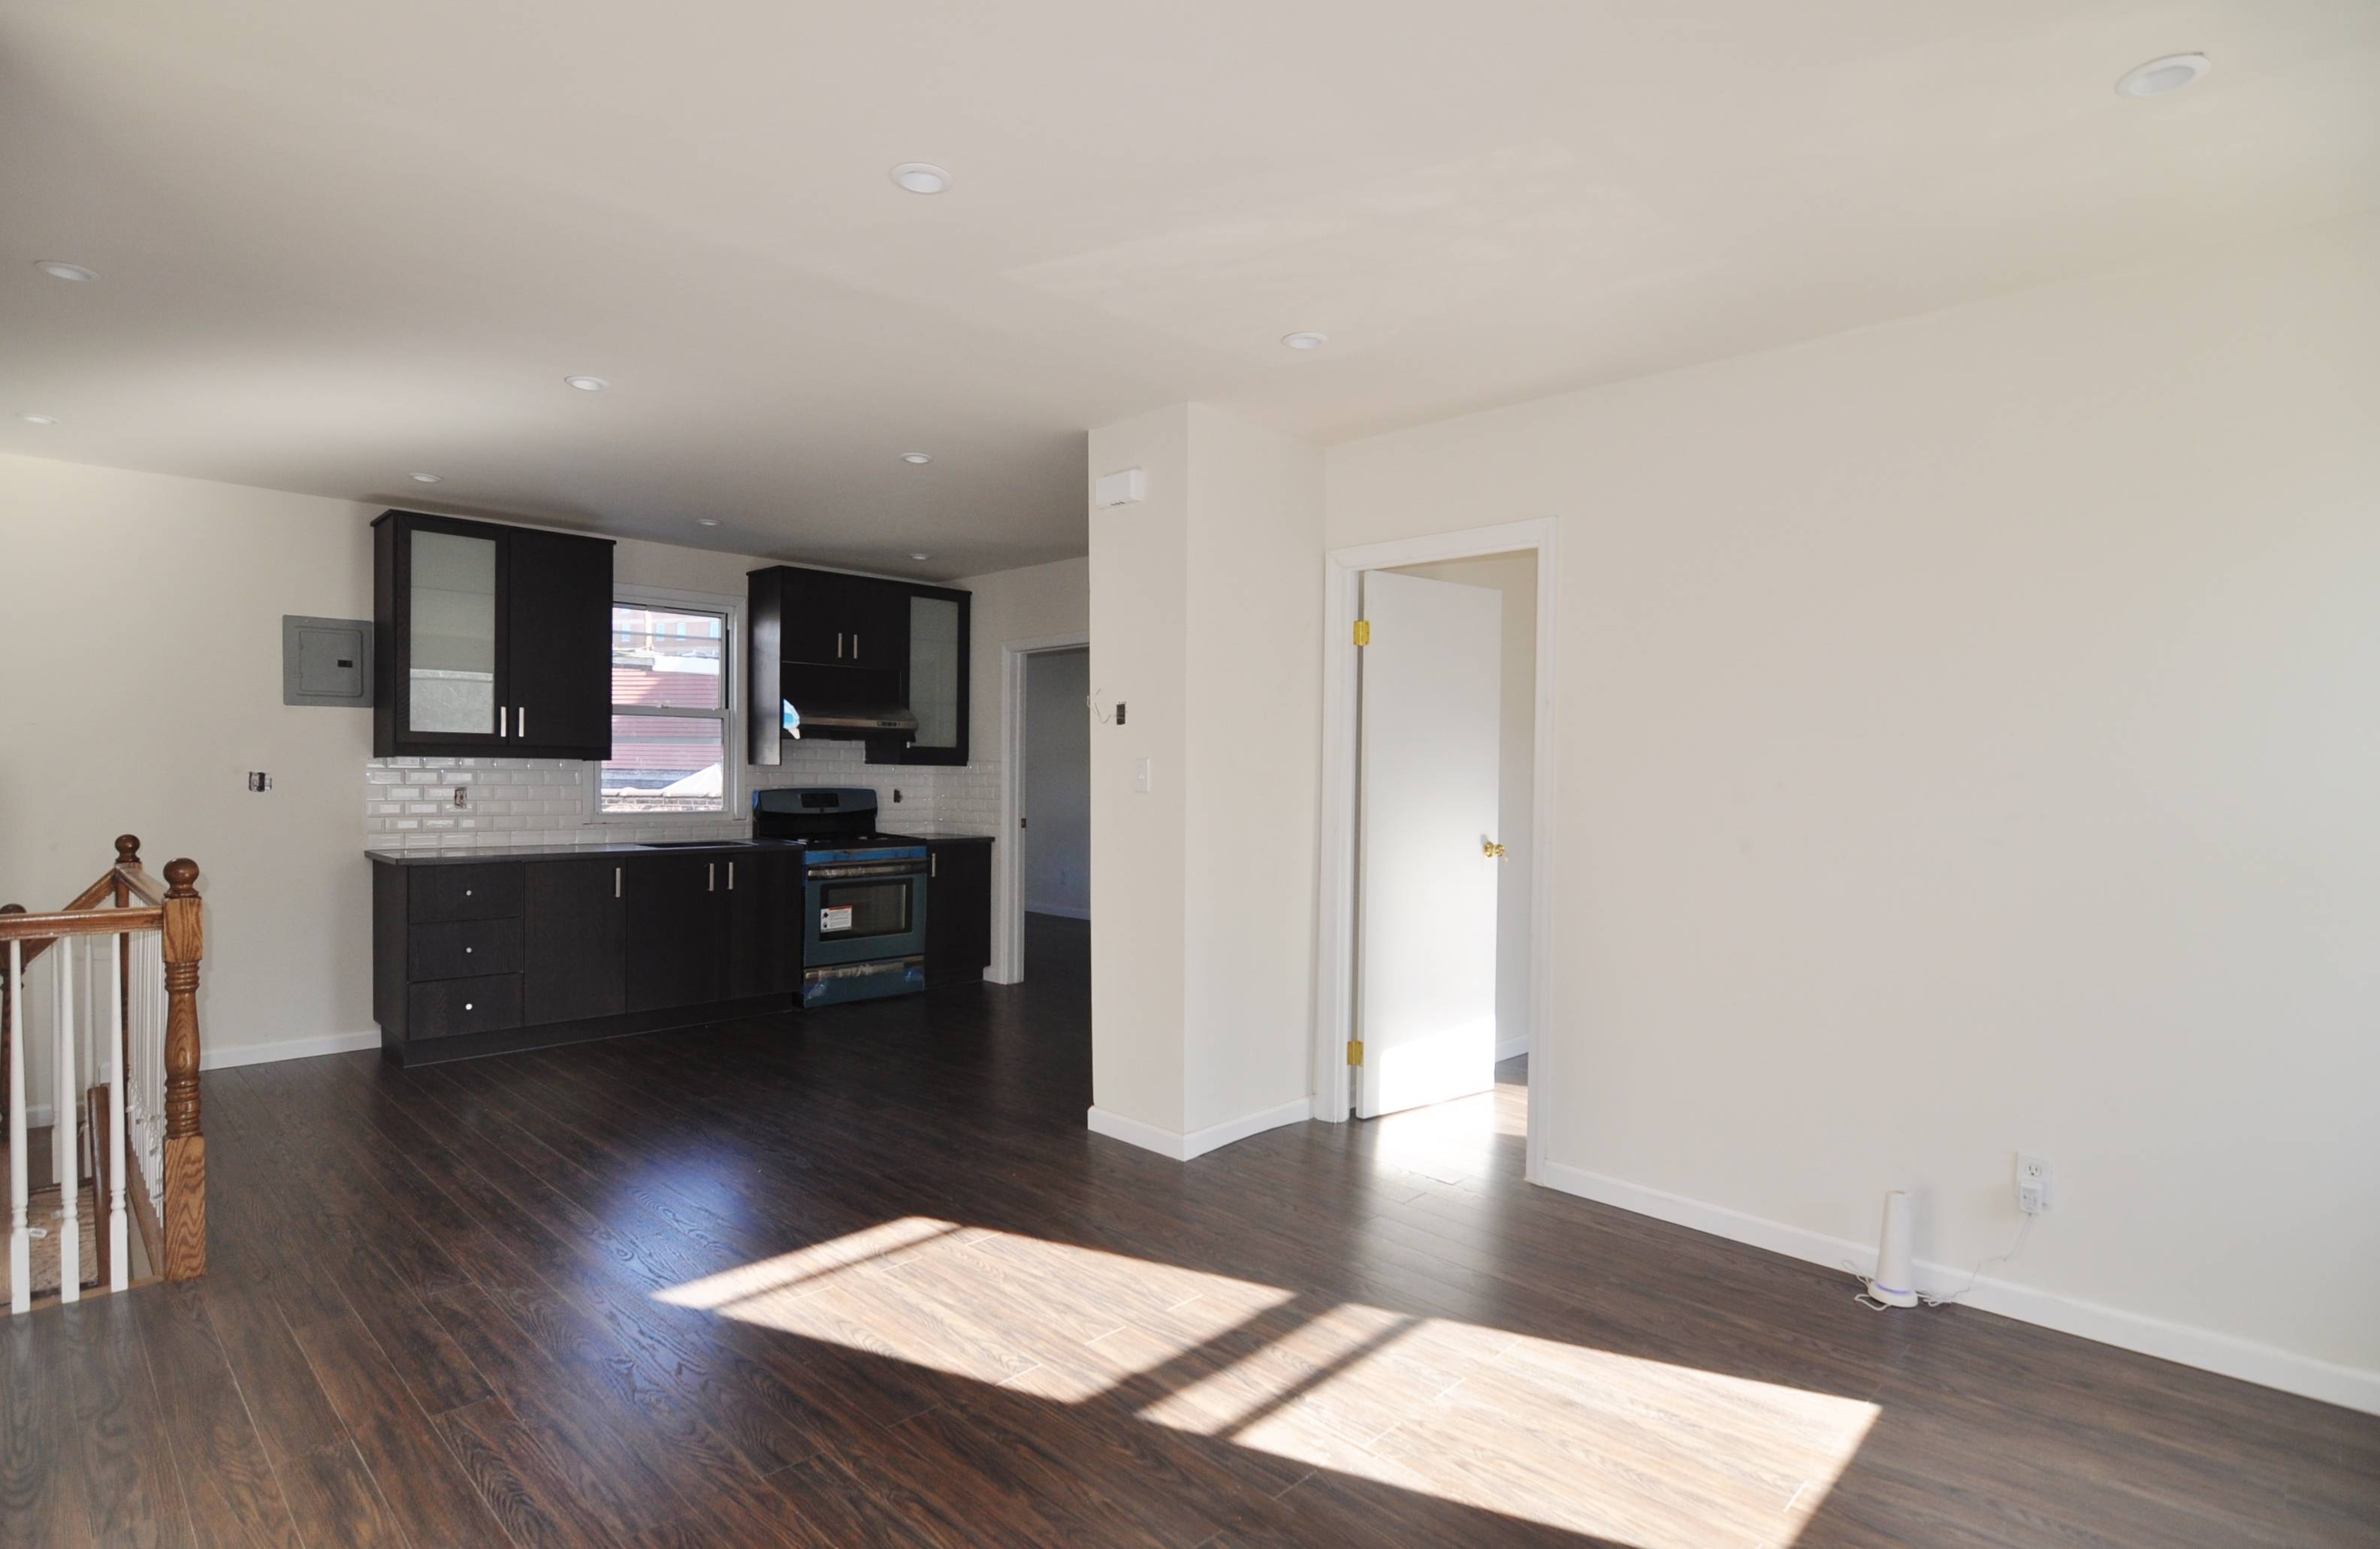 NO FEE! Brand New 4 Bedroom Duplex in Long Island City for Rent!